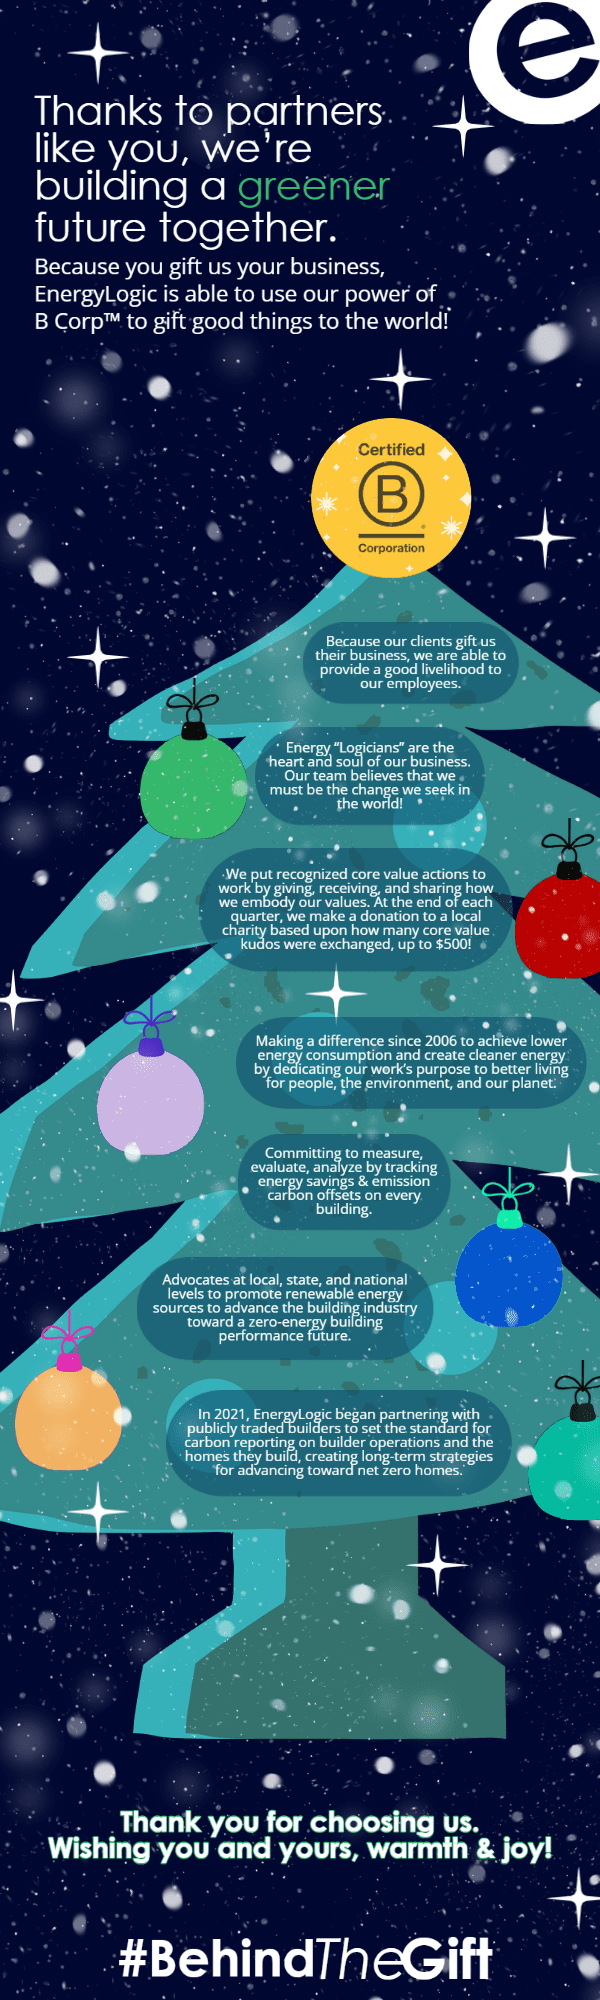 Behind The Gift 2021 Holiday Infographic by EnergyLogic